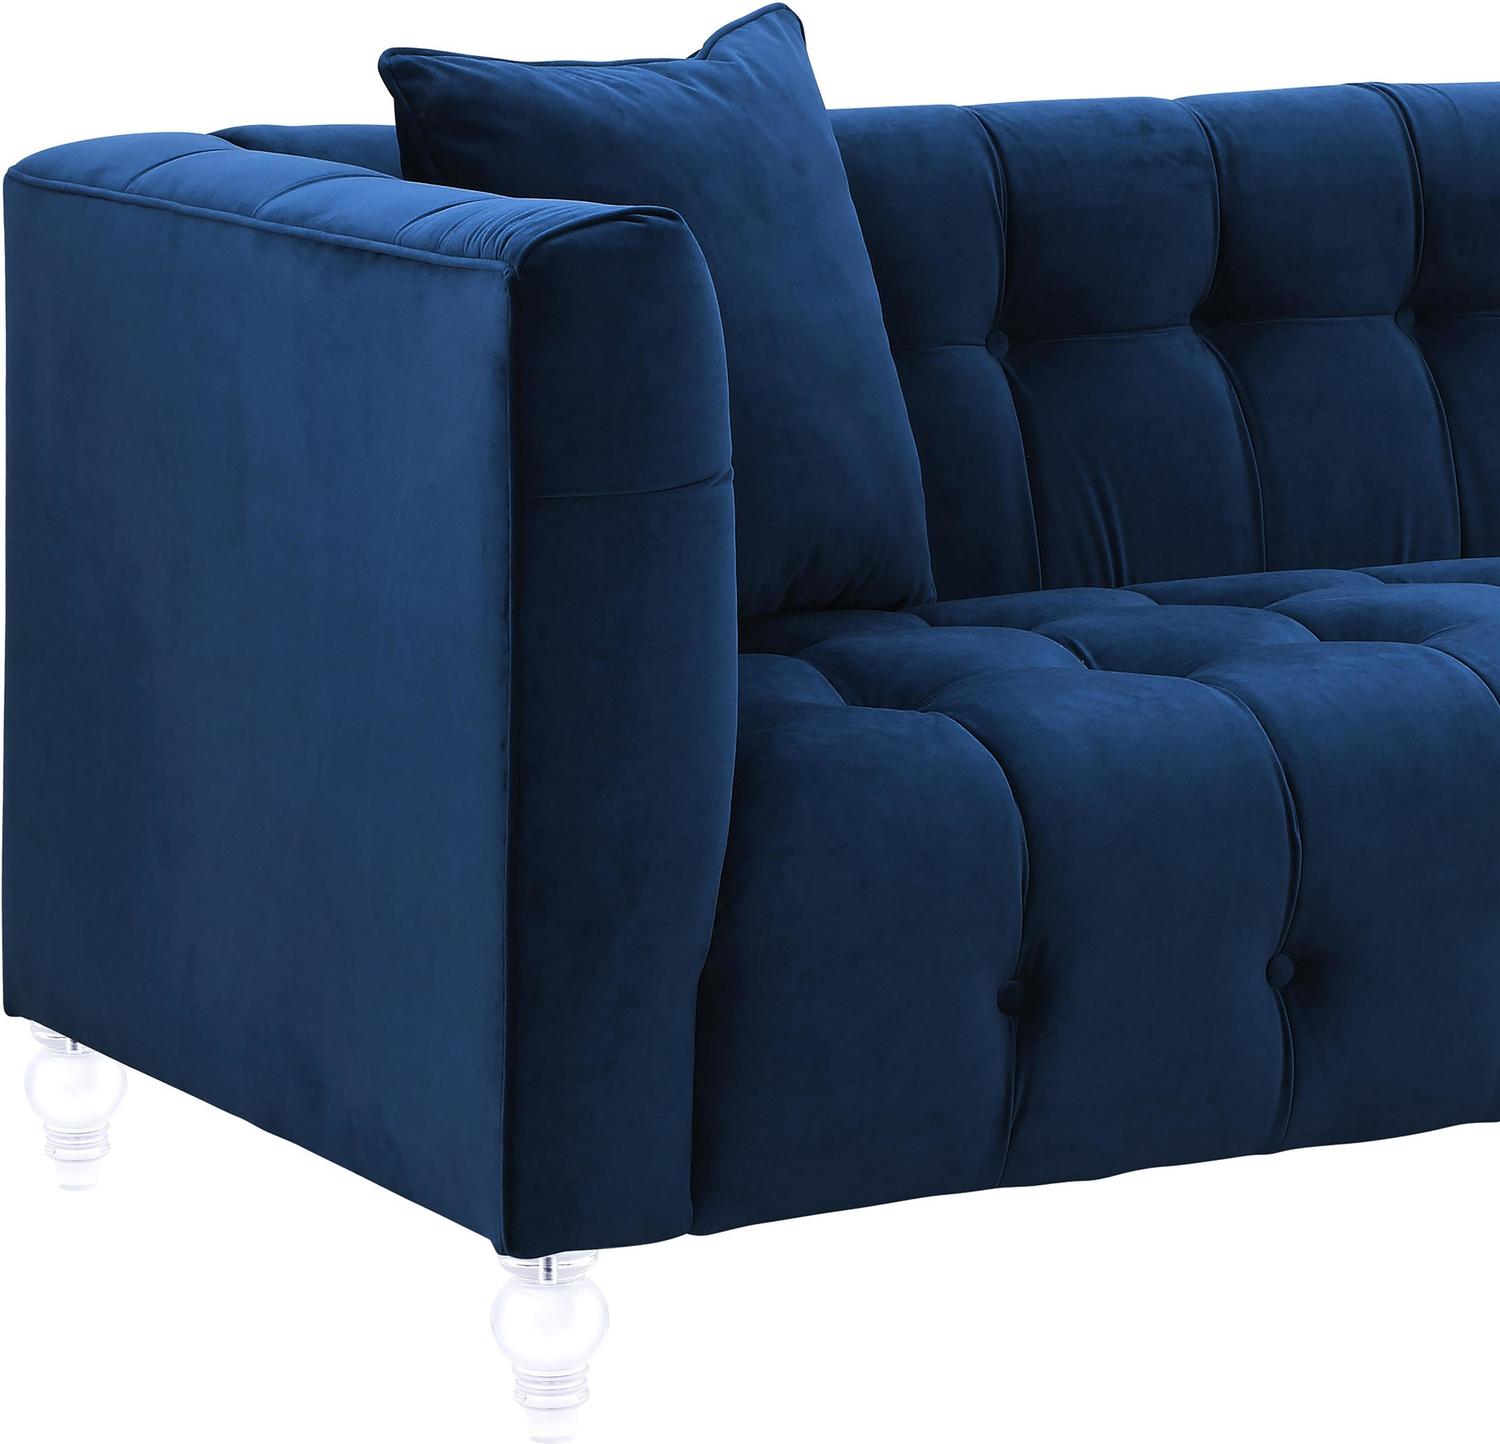 pink couch sectional Contemporary Design Furniture Sofas Navy